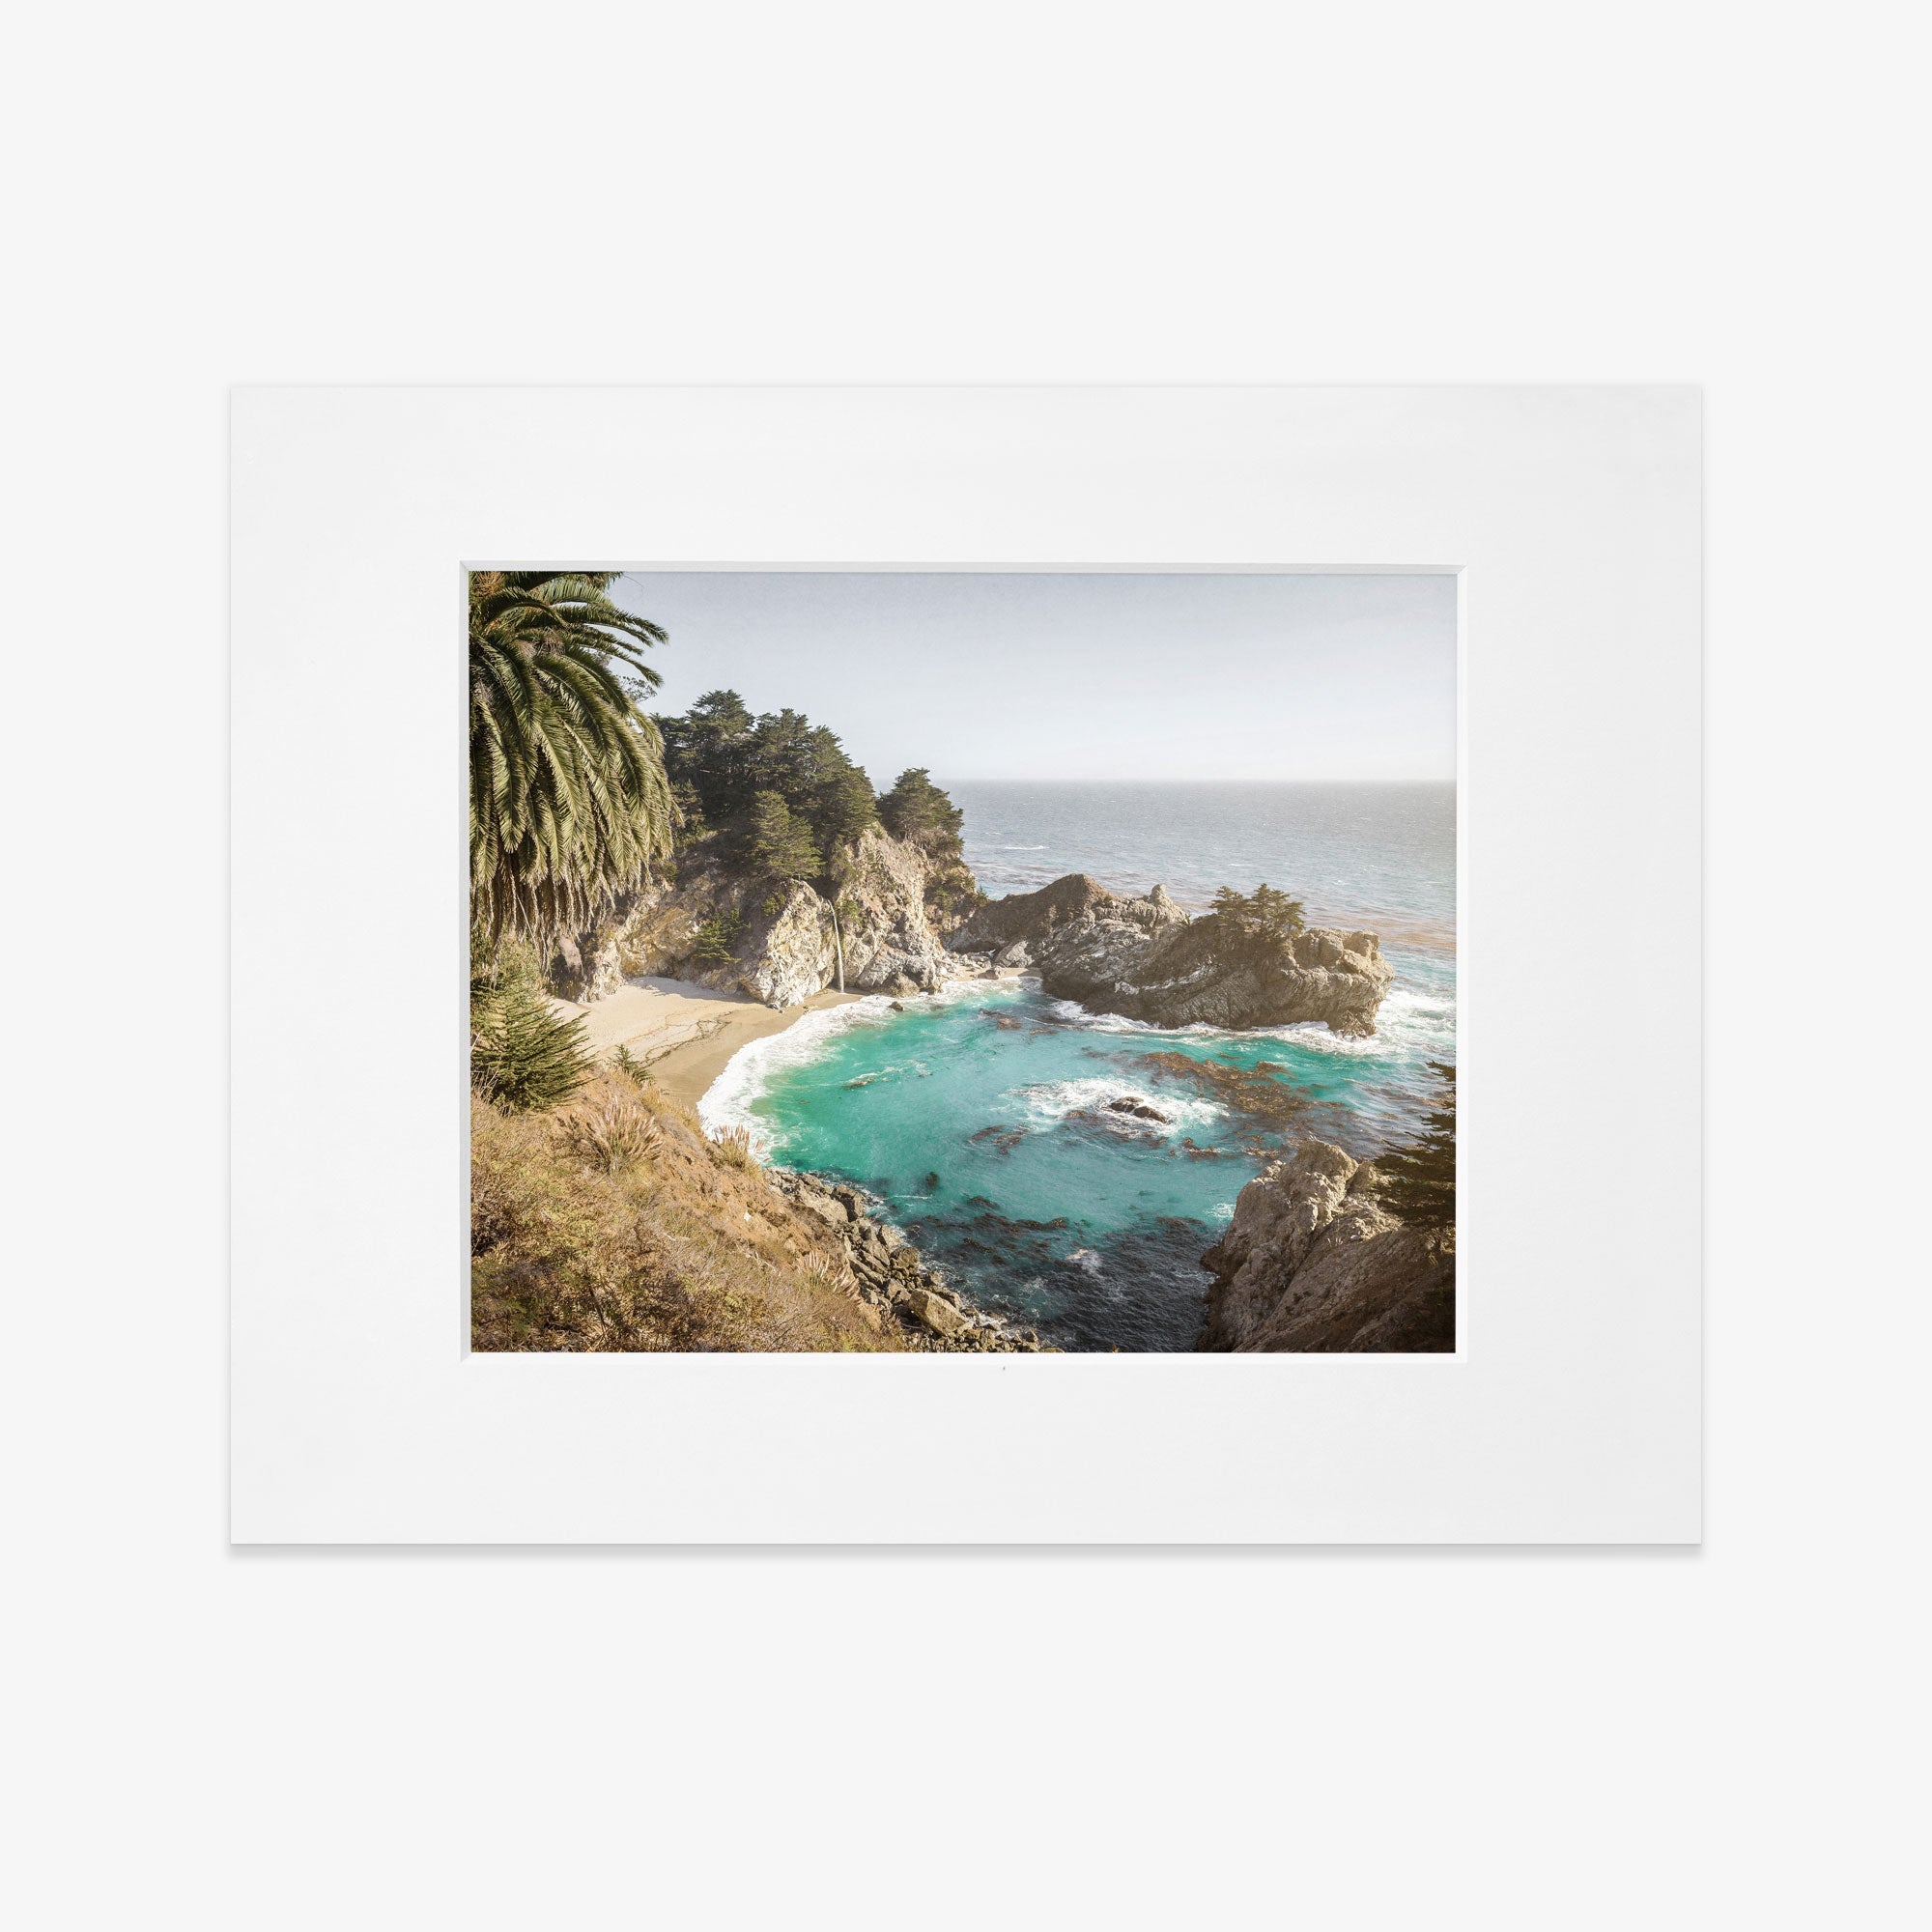 Framed photograph of a Big Sur Coastal Print, &#39;Julia Pffeifer&#39; featuring rugged cliffs along the Pacific Coast Highway, a turquoise sea, and a sandy beach flanked by green palm trees by Offley Green.